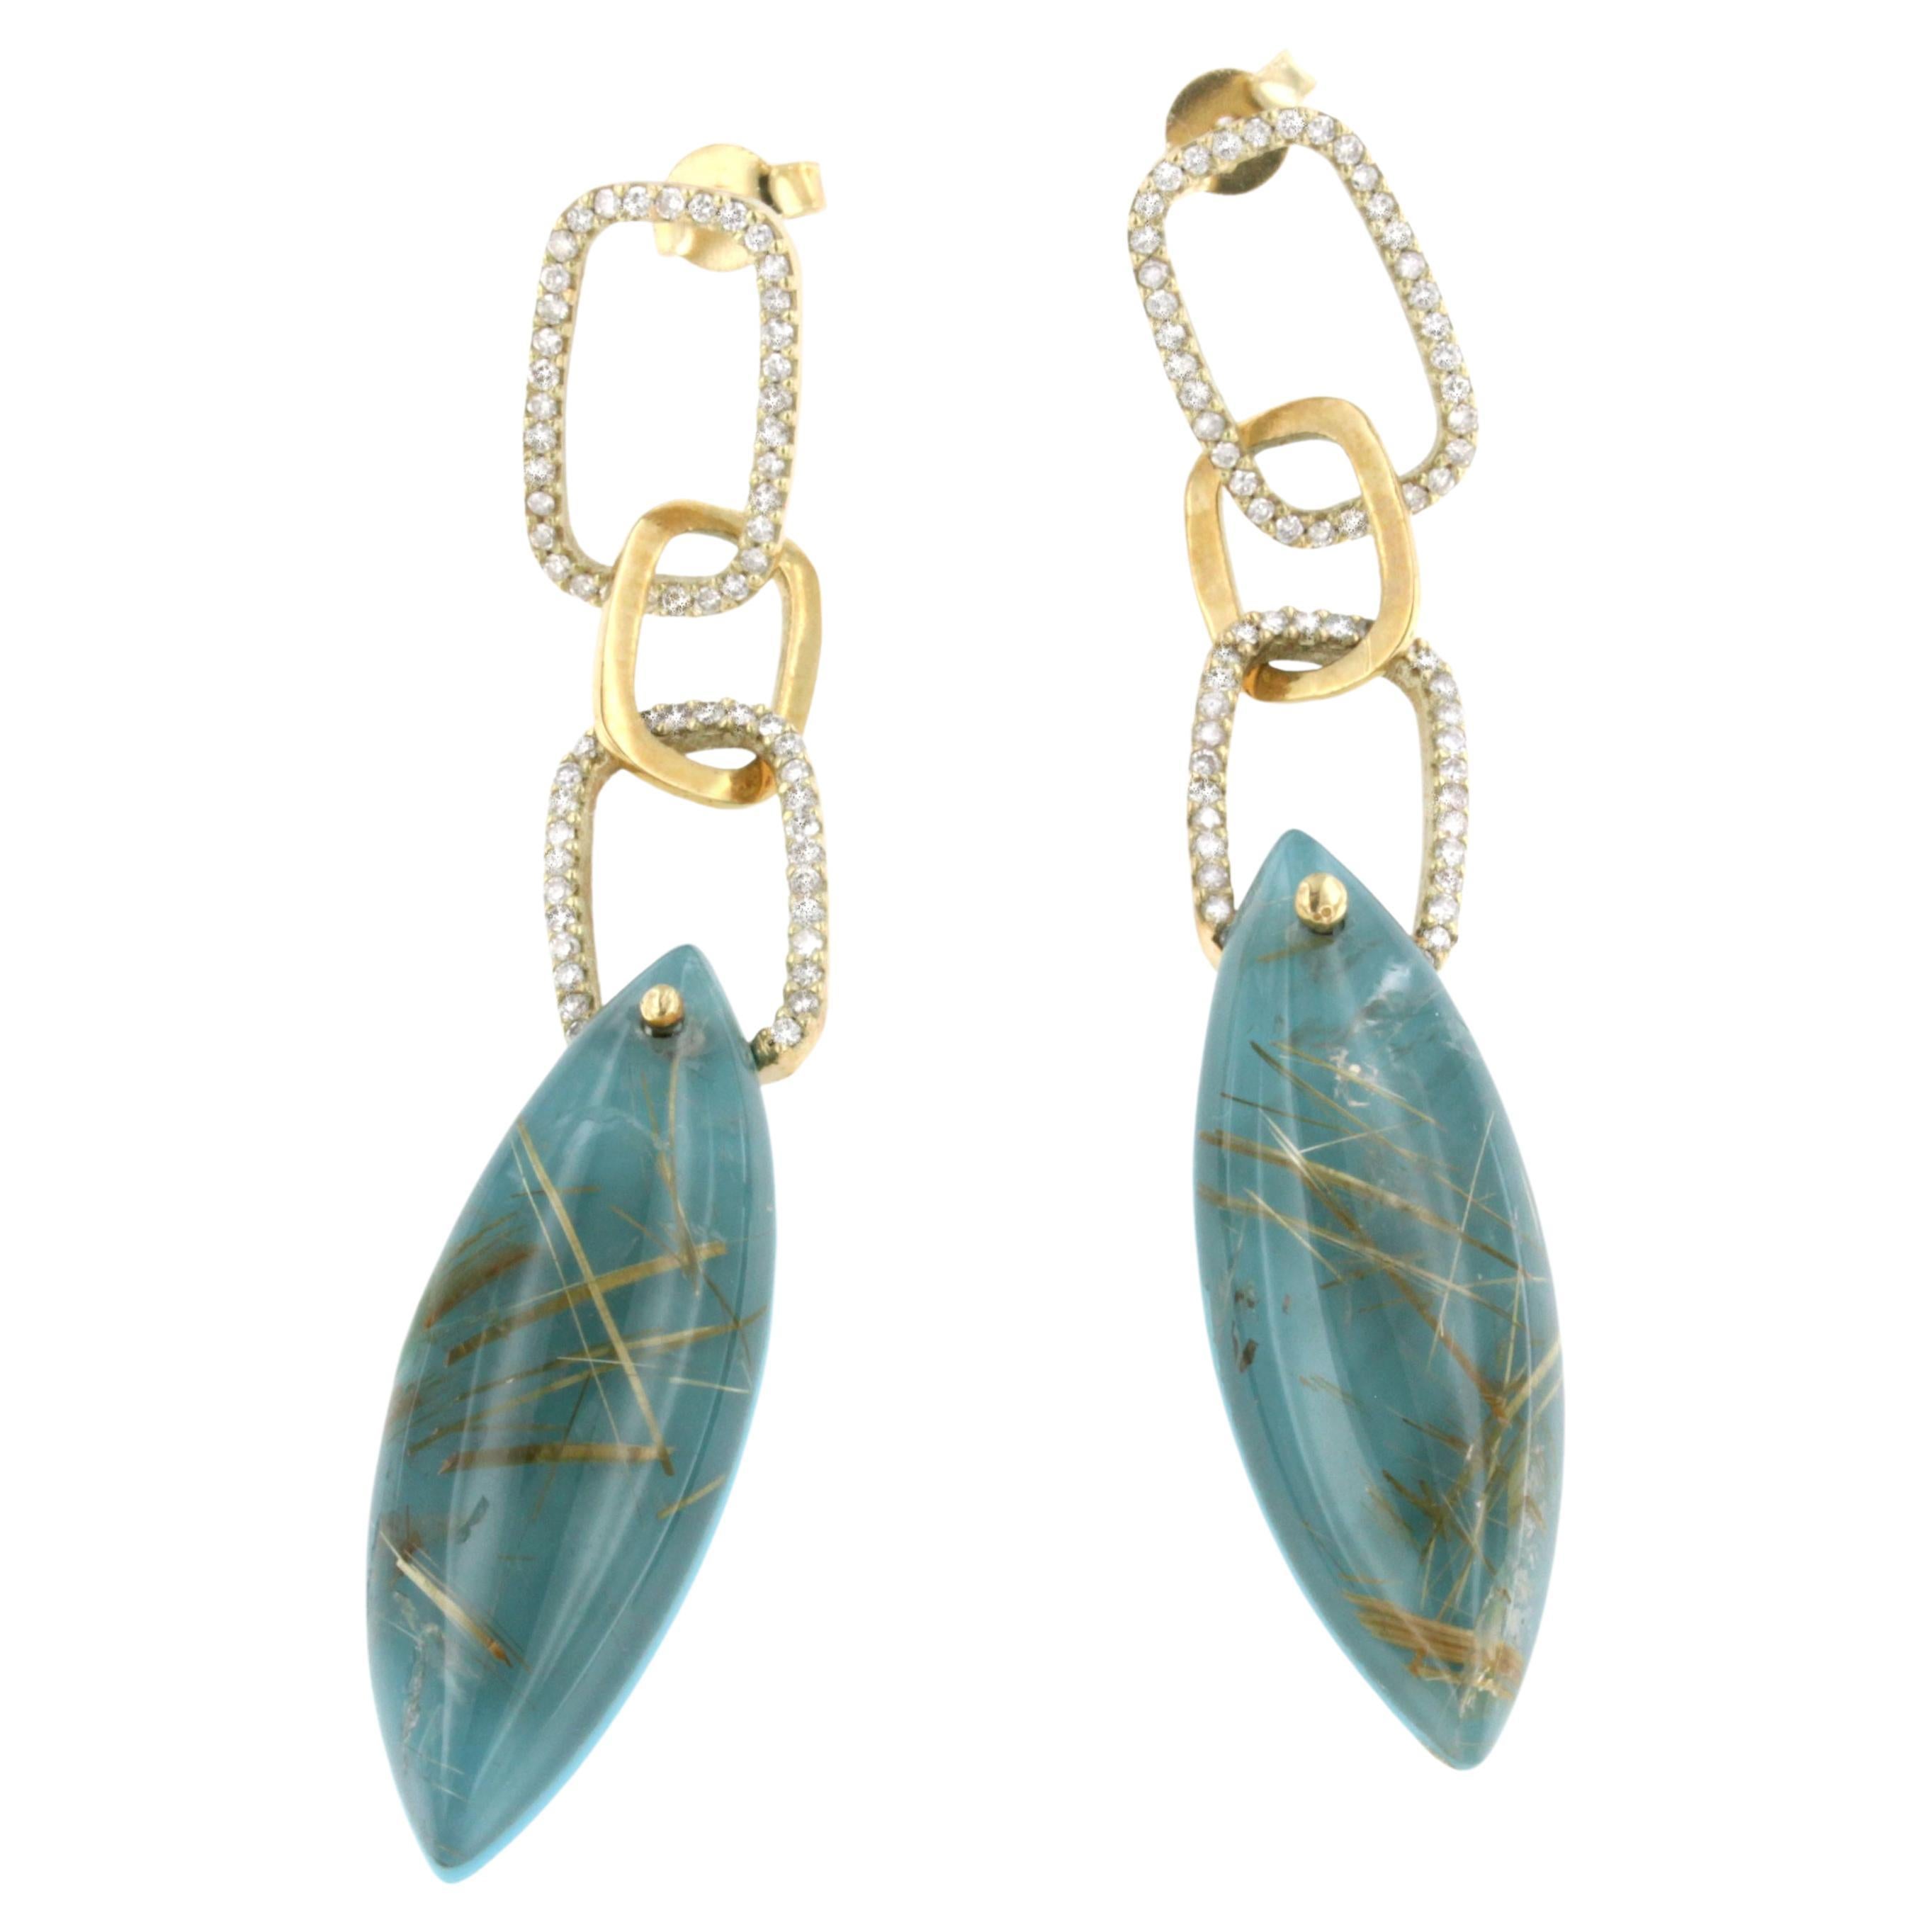 14Kt Rose Gold with Turquoise, Rutilated Quartz, White Diamonds Earrings